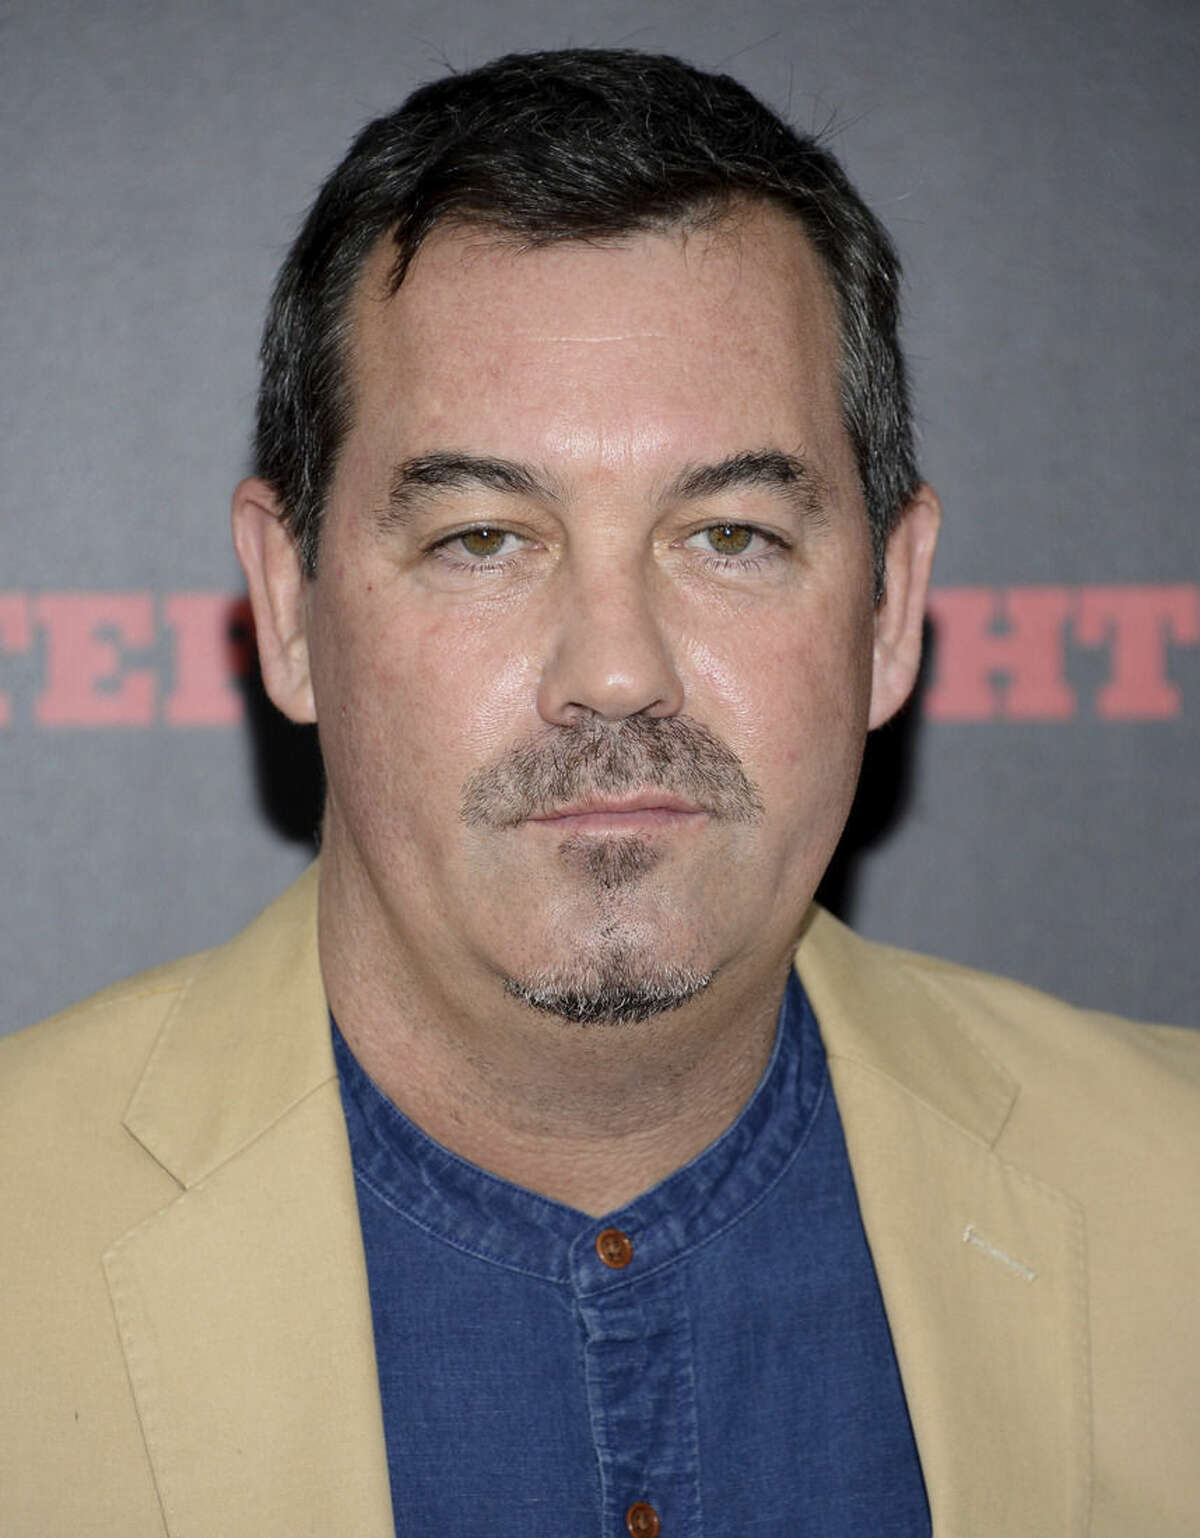 FILE - In this Dec. 14, 2015 file photo, Tony Award-winning composer Duncan Sheik attends the premiere of "The Hateful Eight" in New York. Sheik is ready to let Broadway audiences hear how he turned the provocative, 1991 novel "American Psycho" into one of the season’s bravest pieces of musical theater. It opens April 21, 2016. (Photo by Evan Agostini/Invision/AP, File)